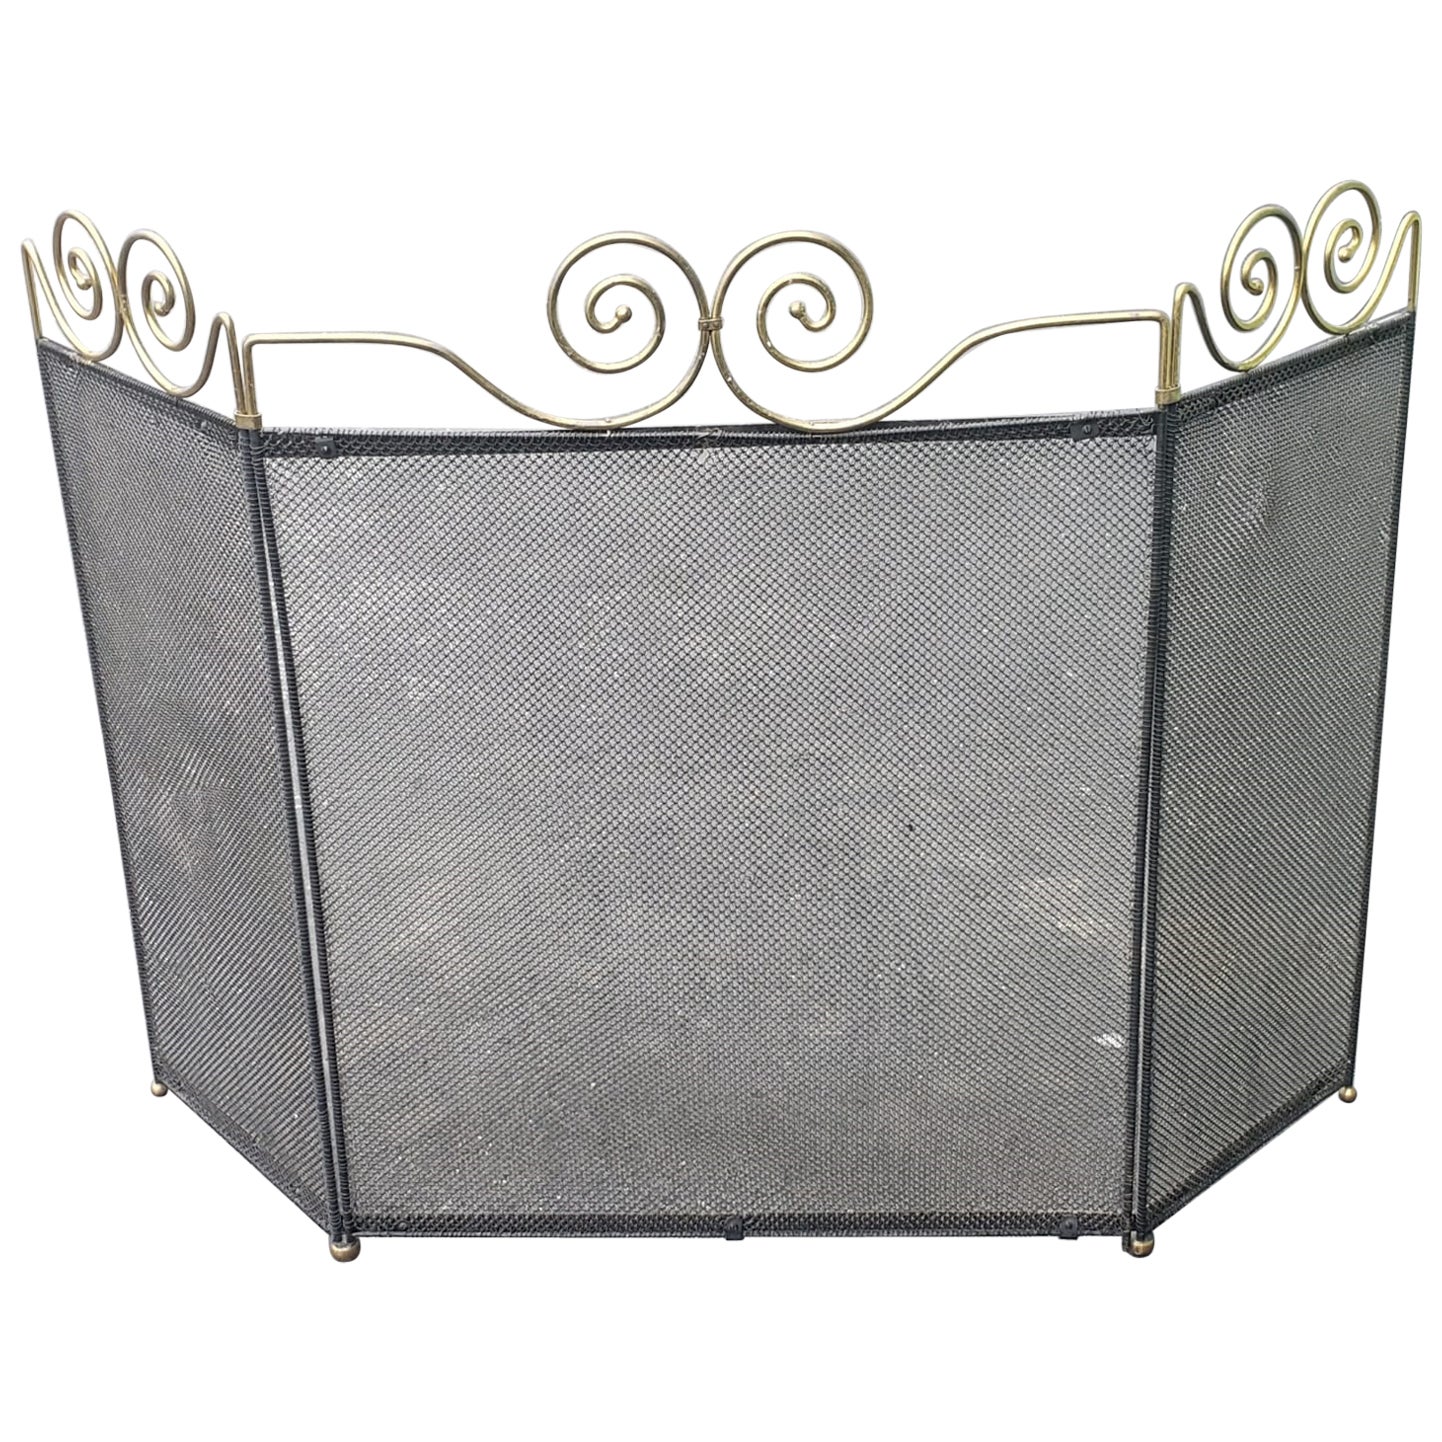 1960s Vintage Wire Mesh and Brass Ornate Fireplace Screen For Sale